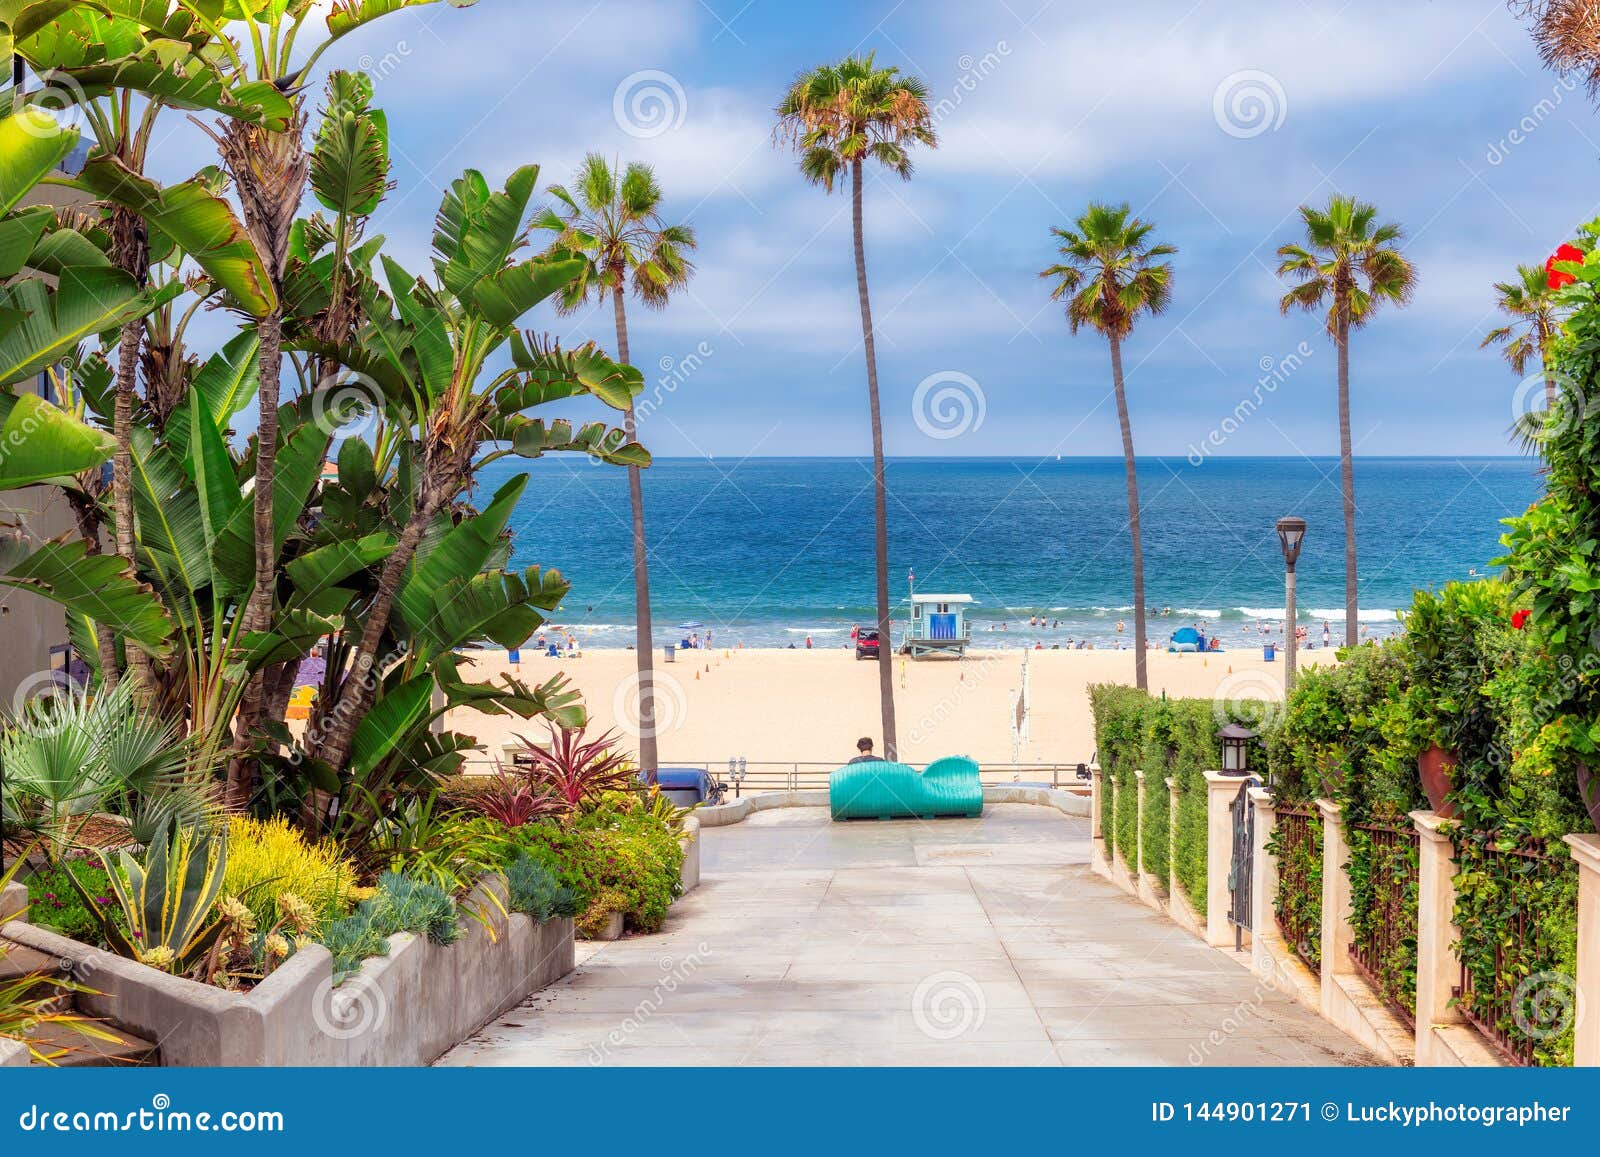 manhattan beach at sunny day time in southern california in los angeles.